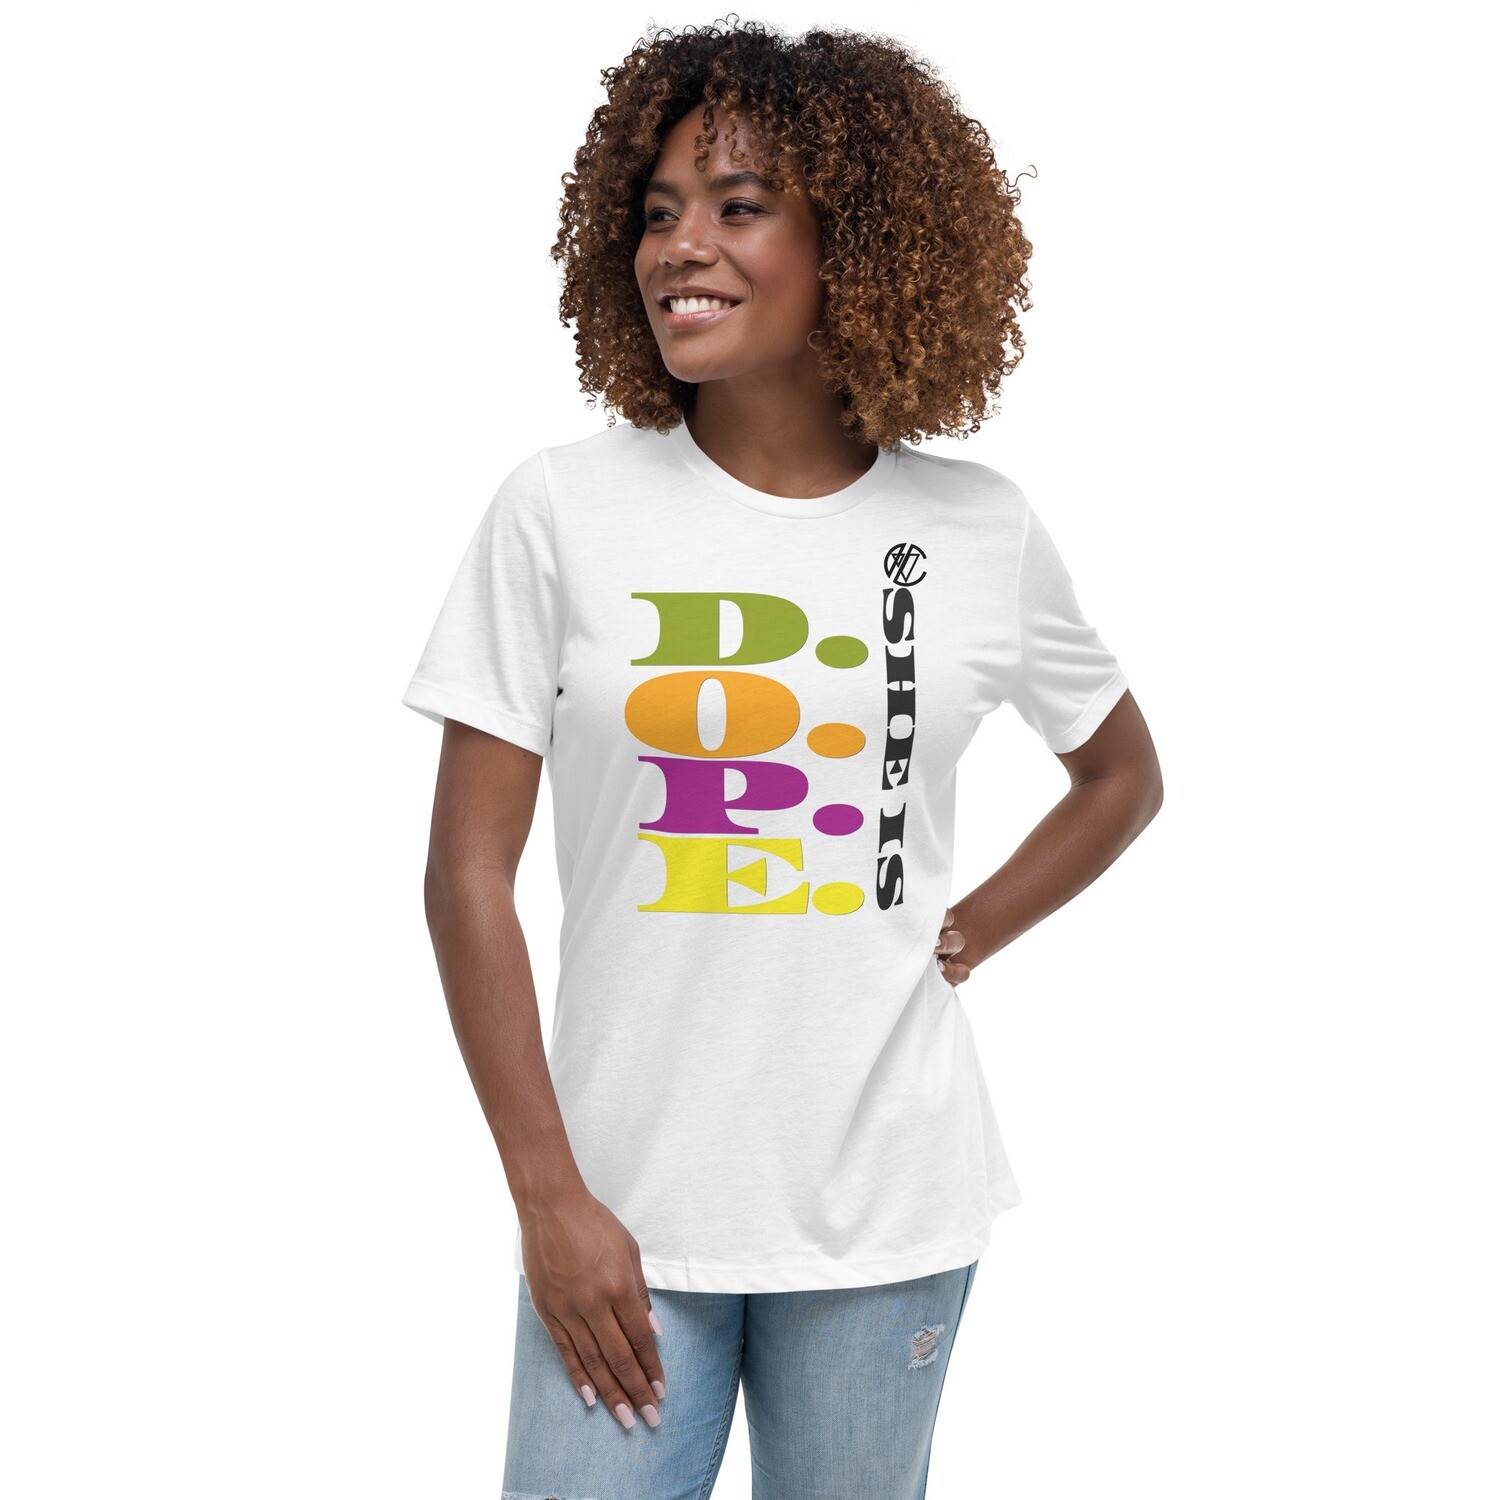 Verona's Closet She Is DOPE Women's Relaxed Fit T-Shirt